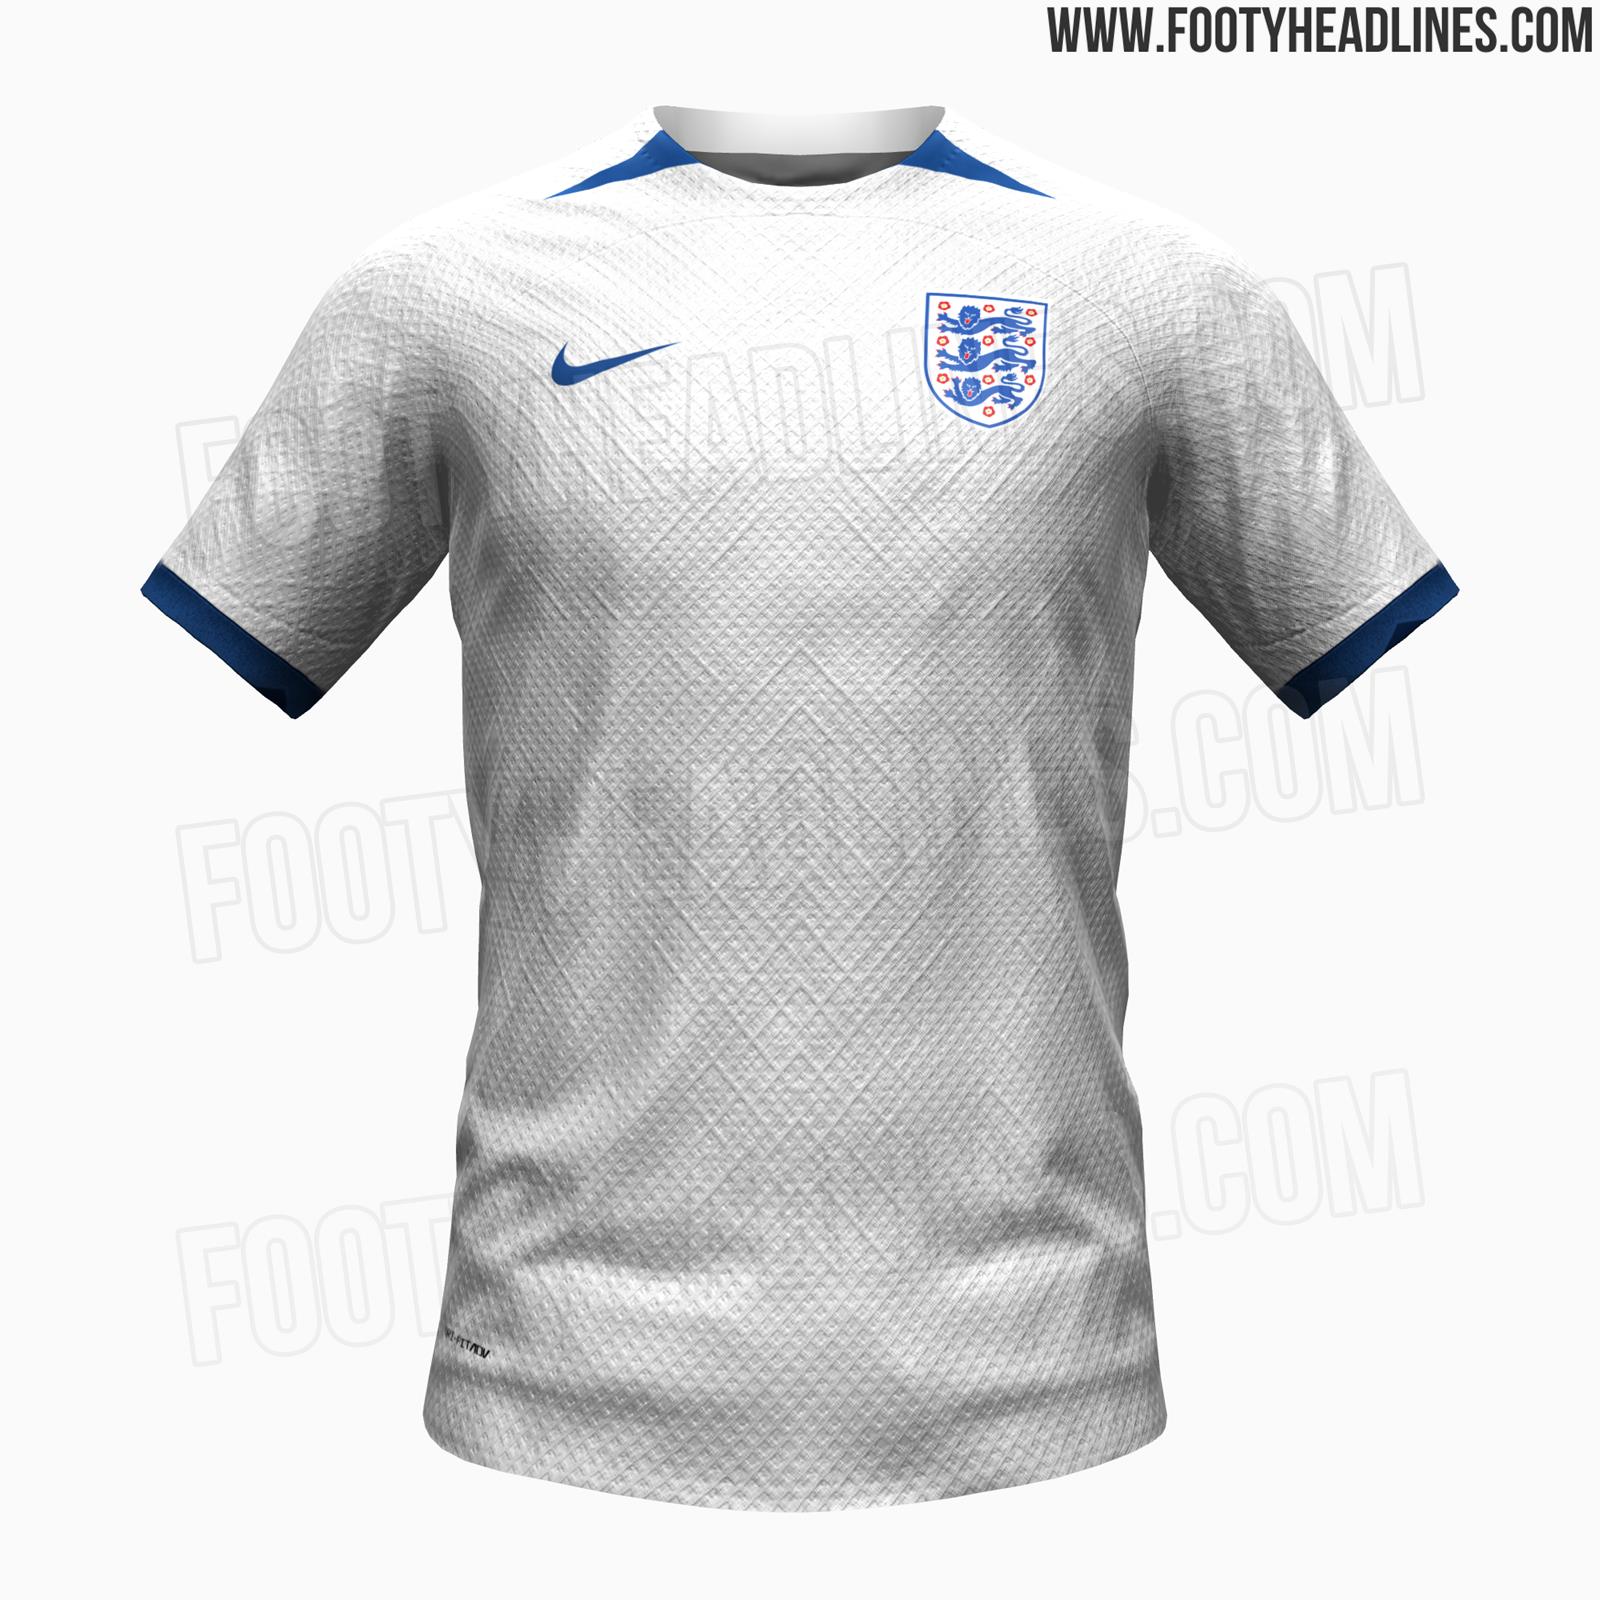 England unveil brand new Nike kit for World Cup 2018 - with a classic white  home shirt and retro red away one